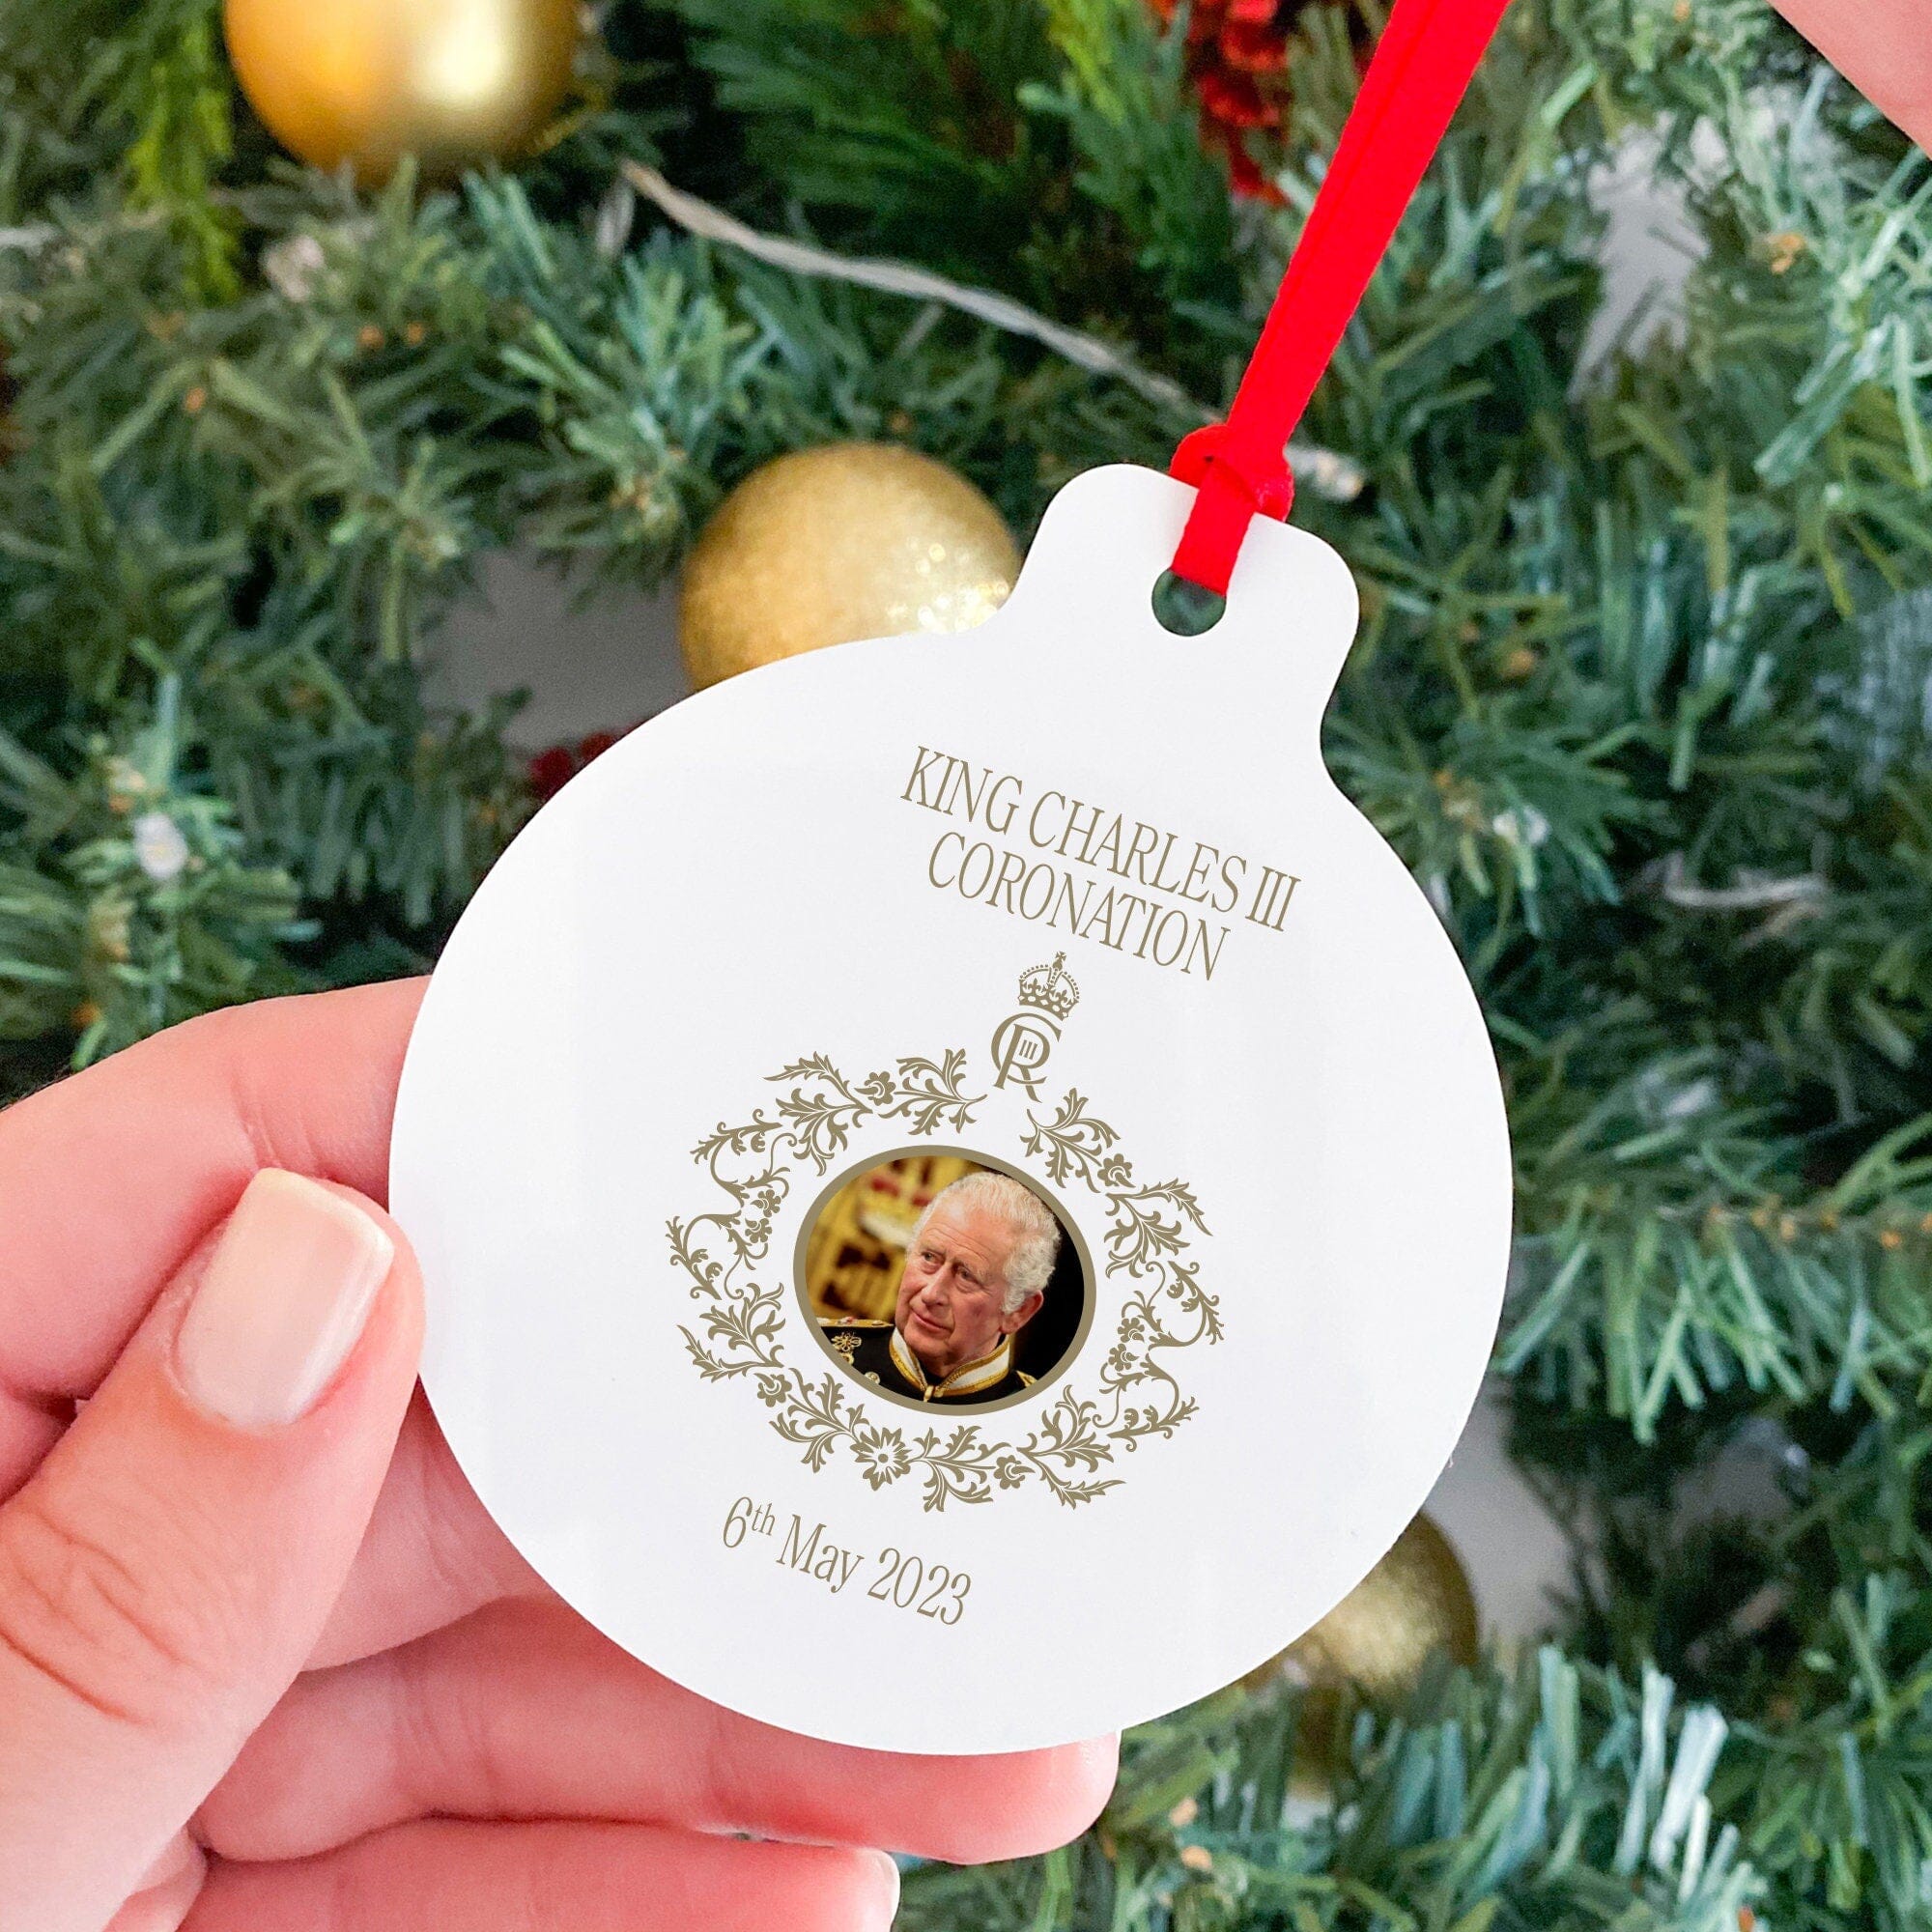 King Charles 3 Coronation ornament with King's photo, Gift for her him, King souvenir